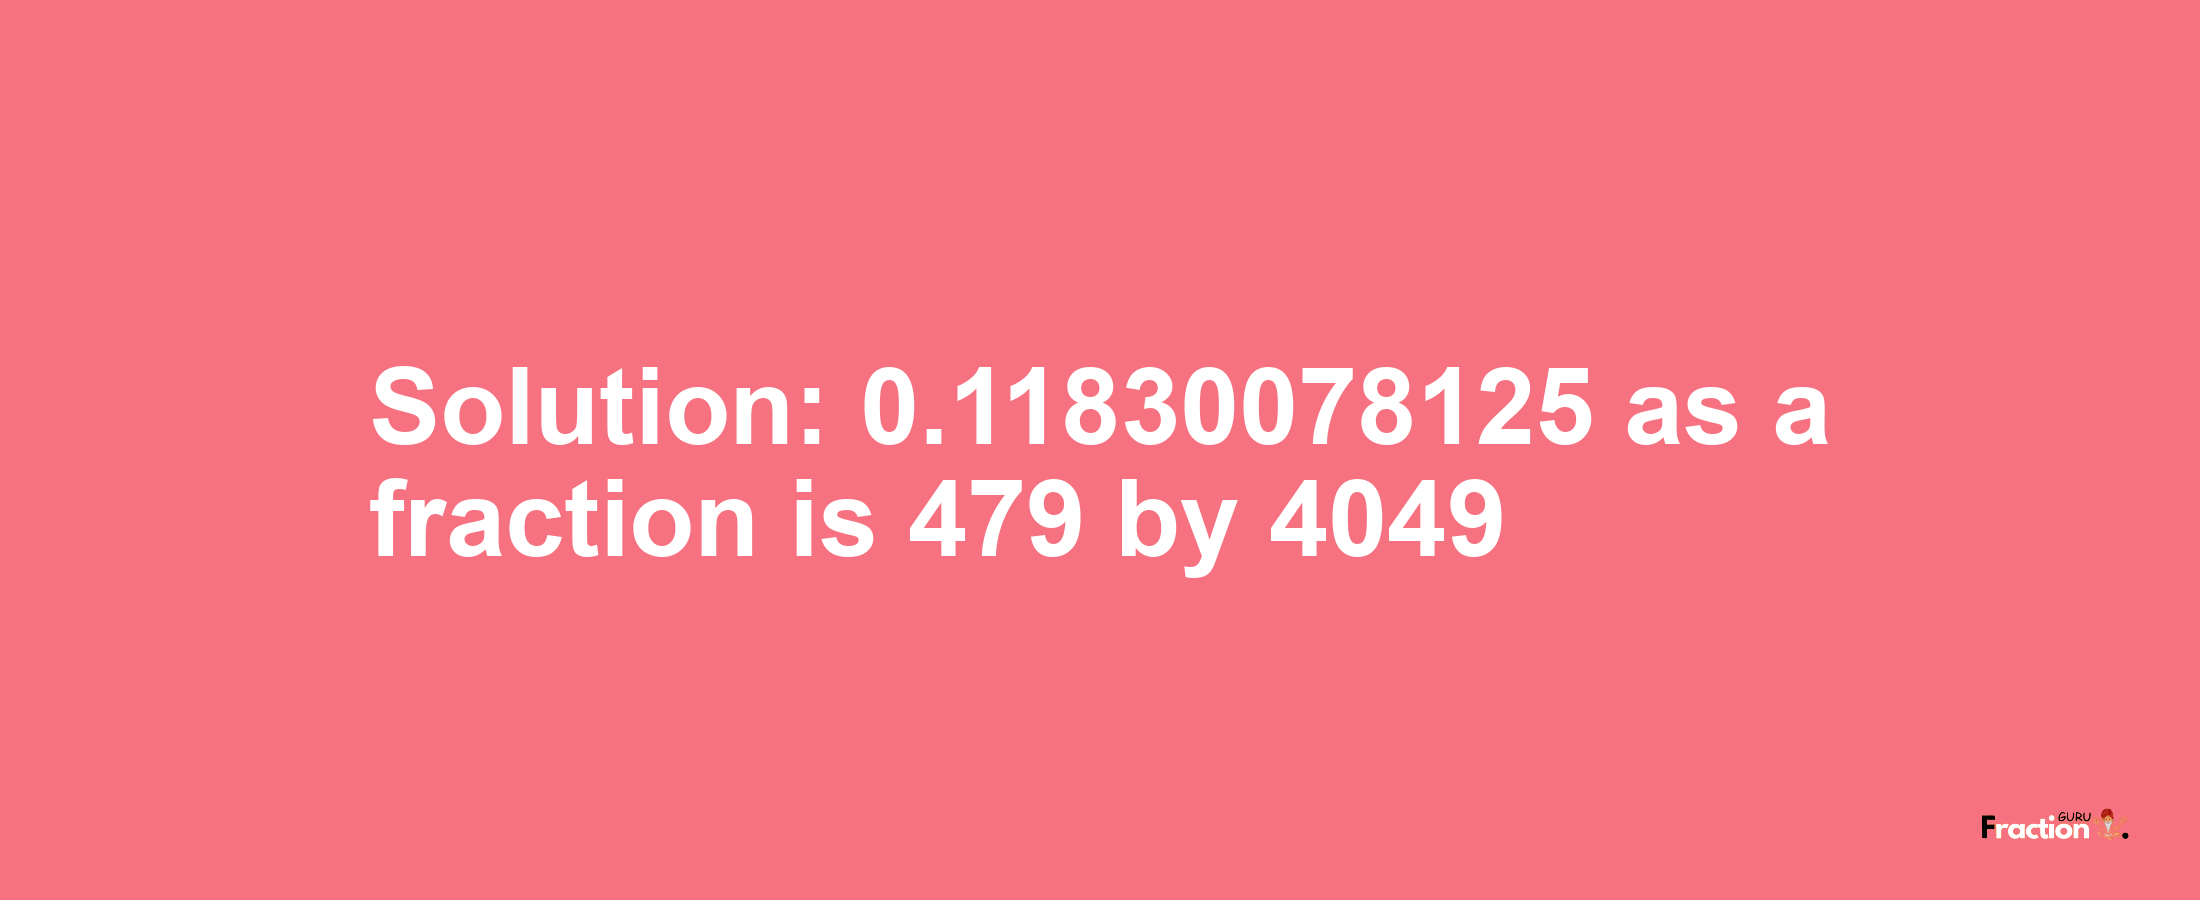 Solution:0.11830078125 as a fraction is 479/4049